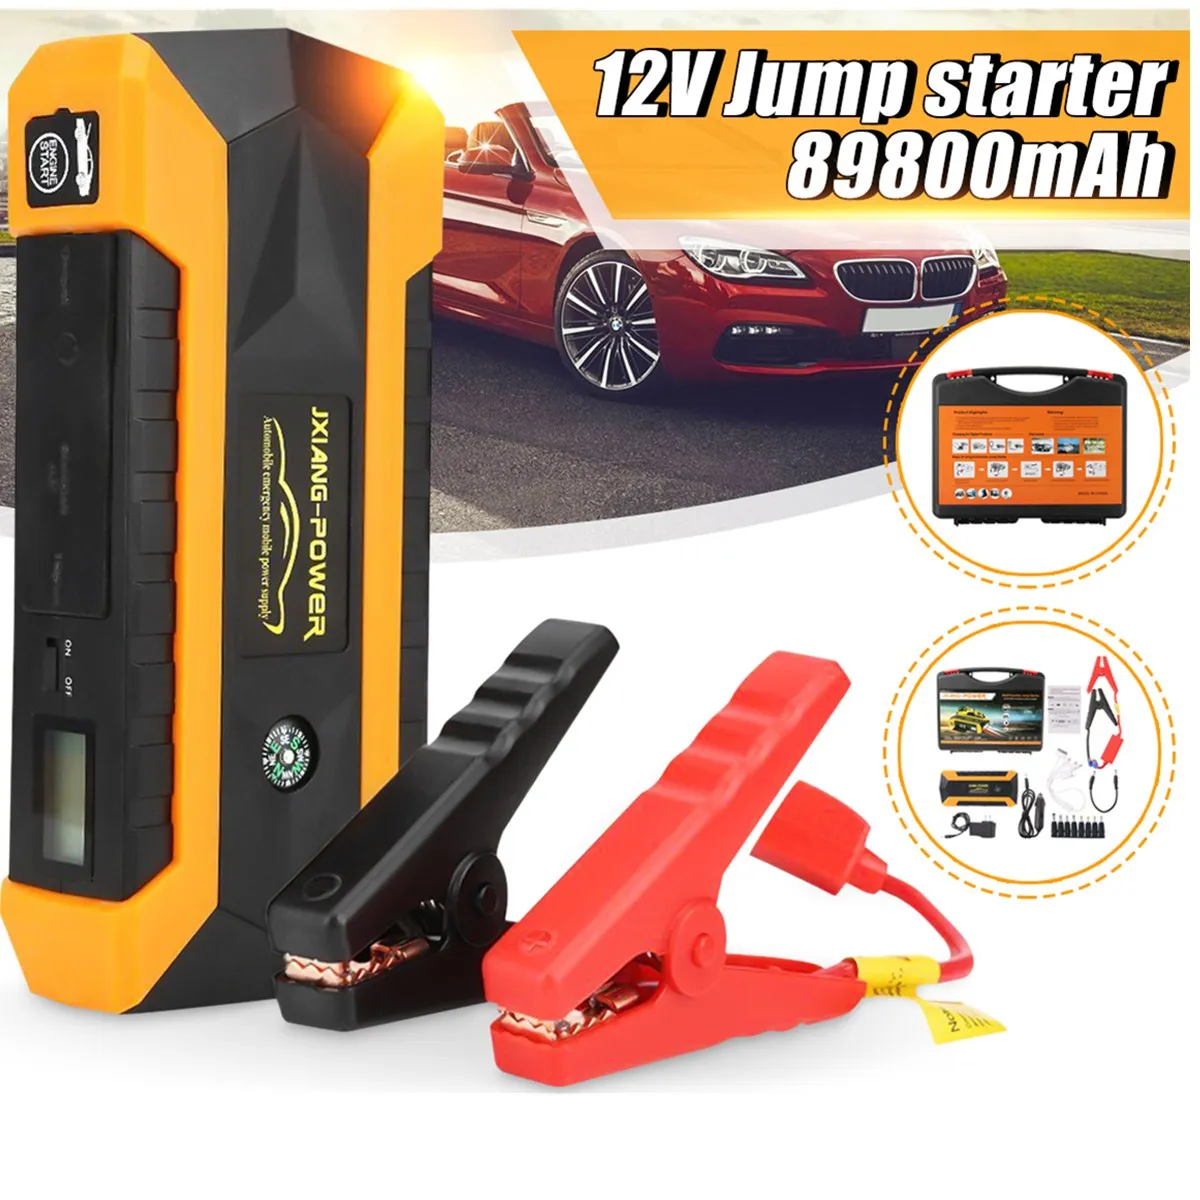 FAST CAR charger adapter for # 2003 2004 Mobile Power Instant Boost jump starter